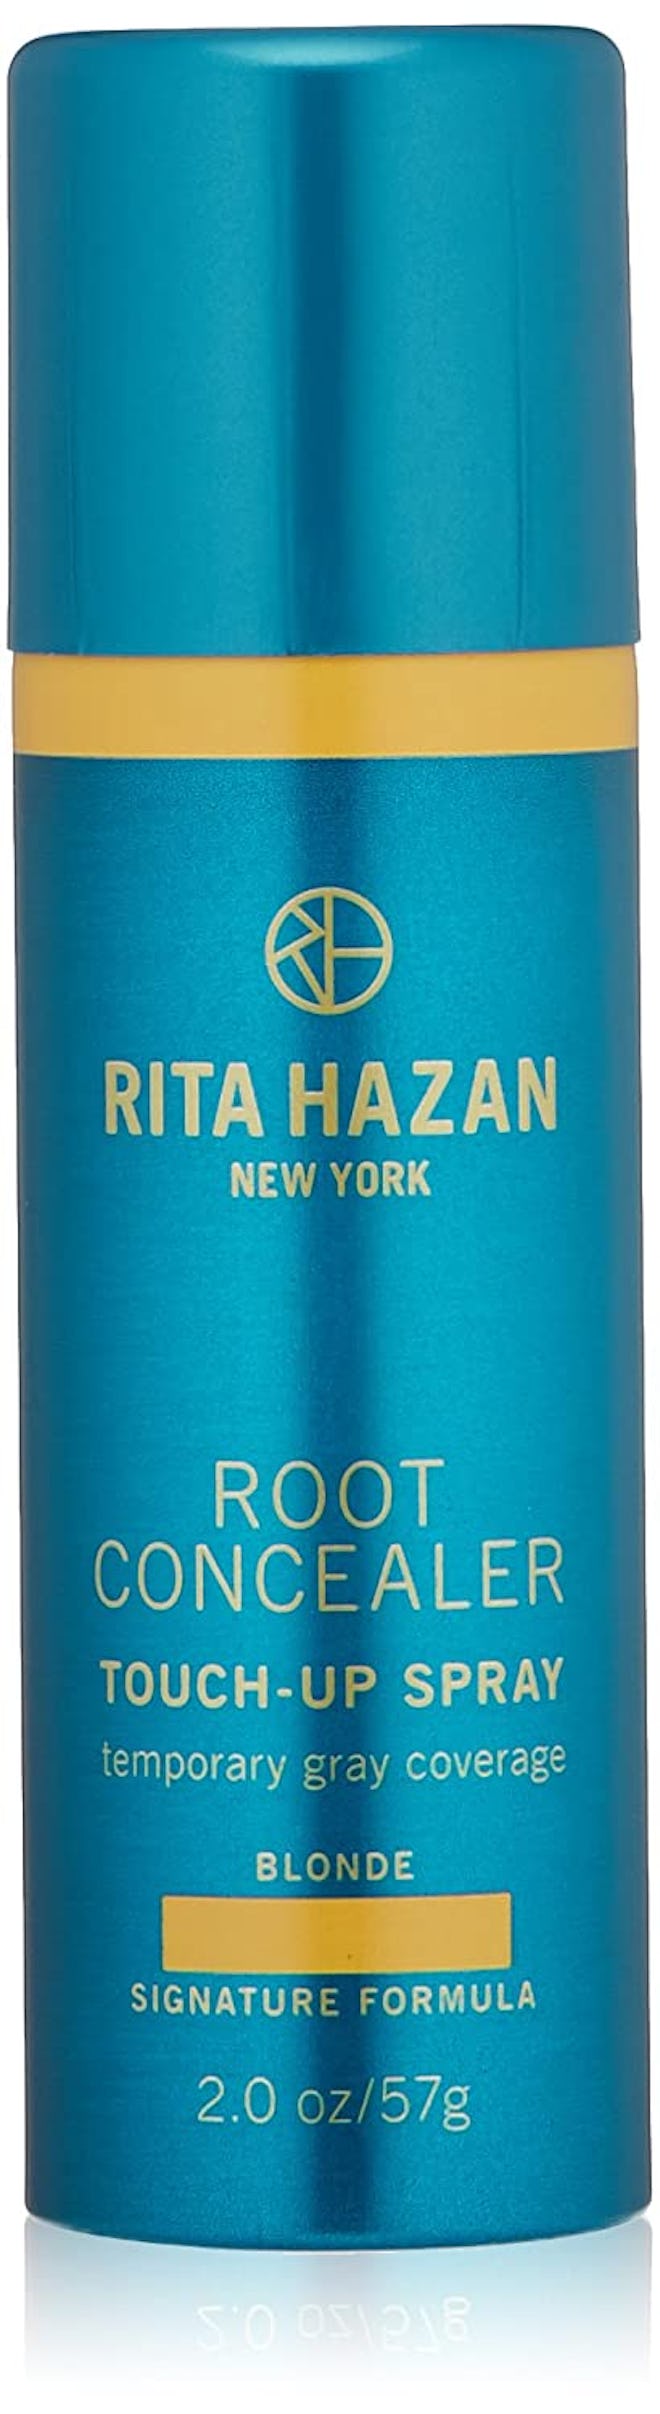 rita hazan root concealer touch up spray is the best product to cover up roots for damaged bleached ...